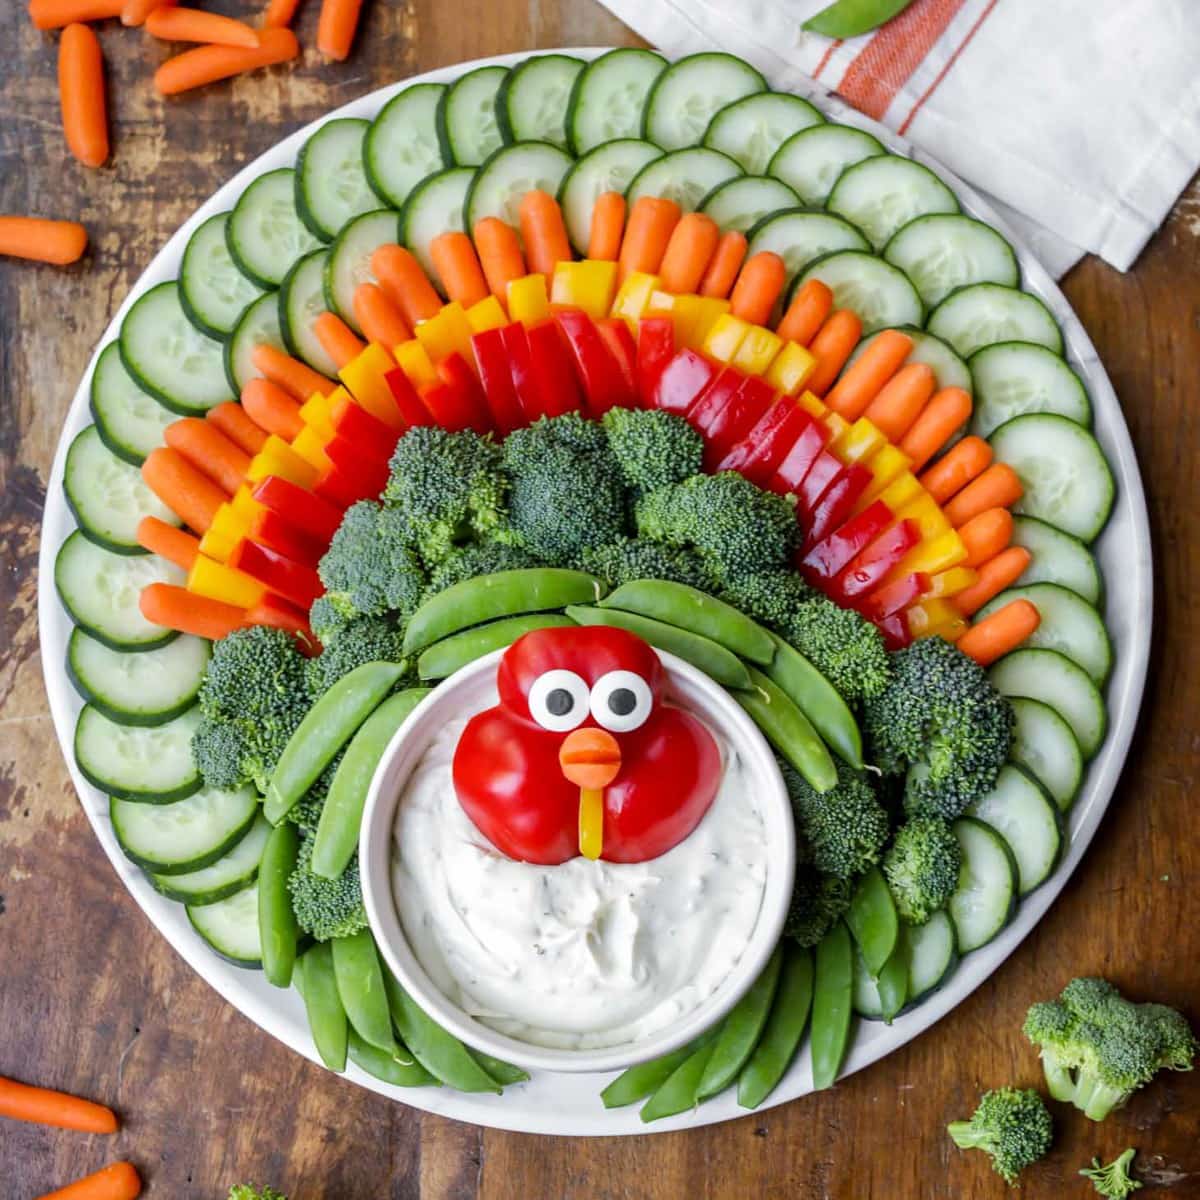 Turkey veggie tray with cucumbers, carrots, peppers, broccoli, and peas